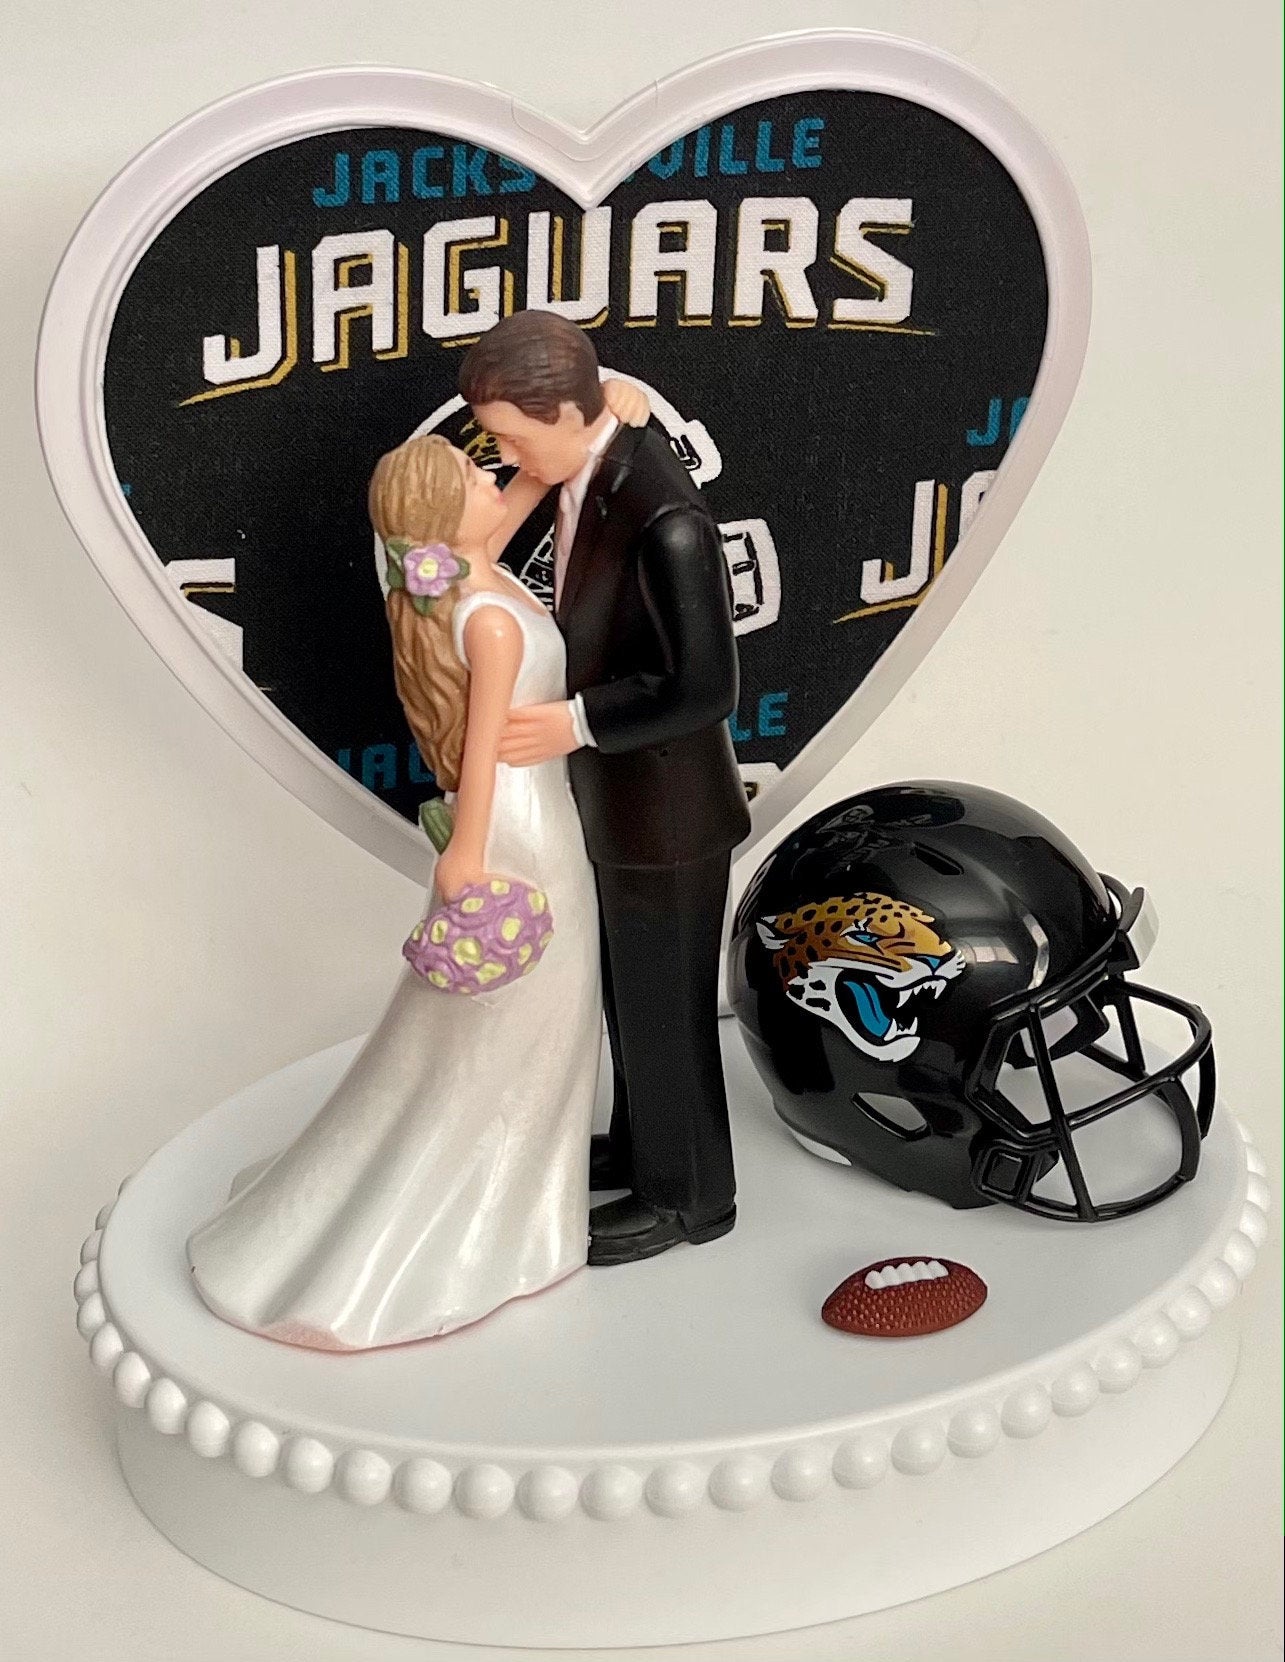 Wedding Cake Topper Jacksonville Jaguars Football Themed Beautiful Long-Haired Bride Groom Sports Fans One-of-a-Kind Reception Bridal Gift